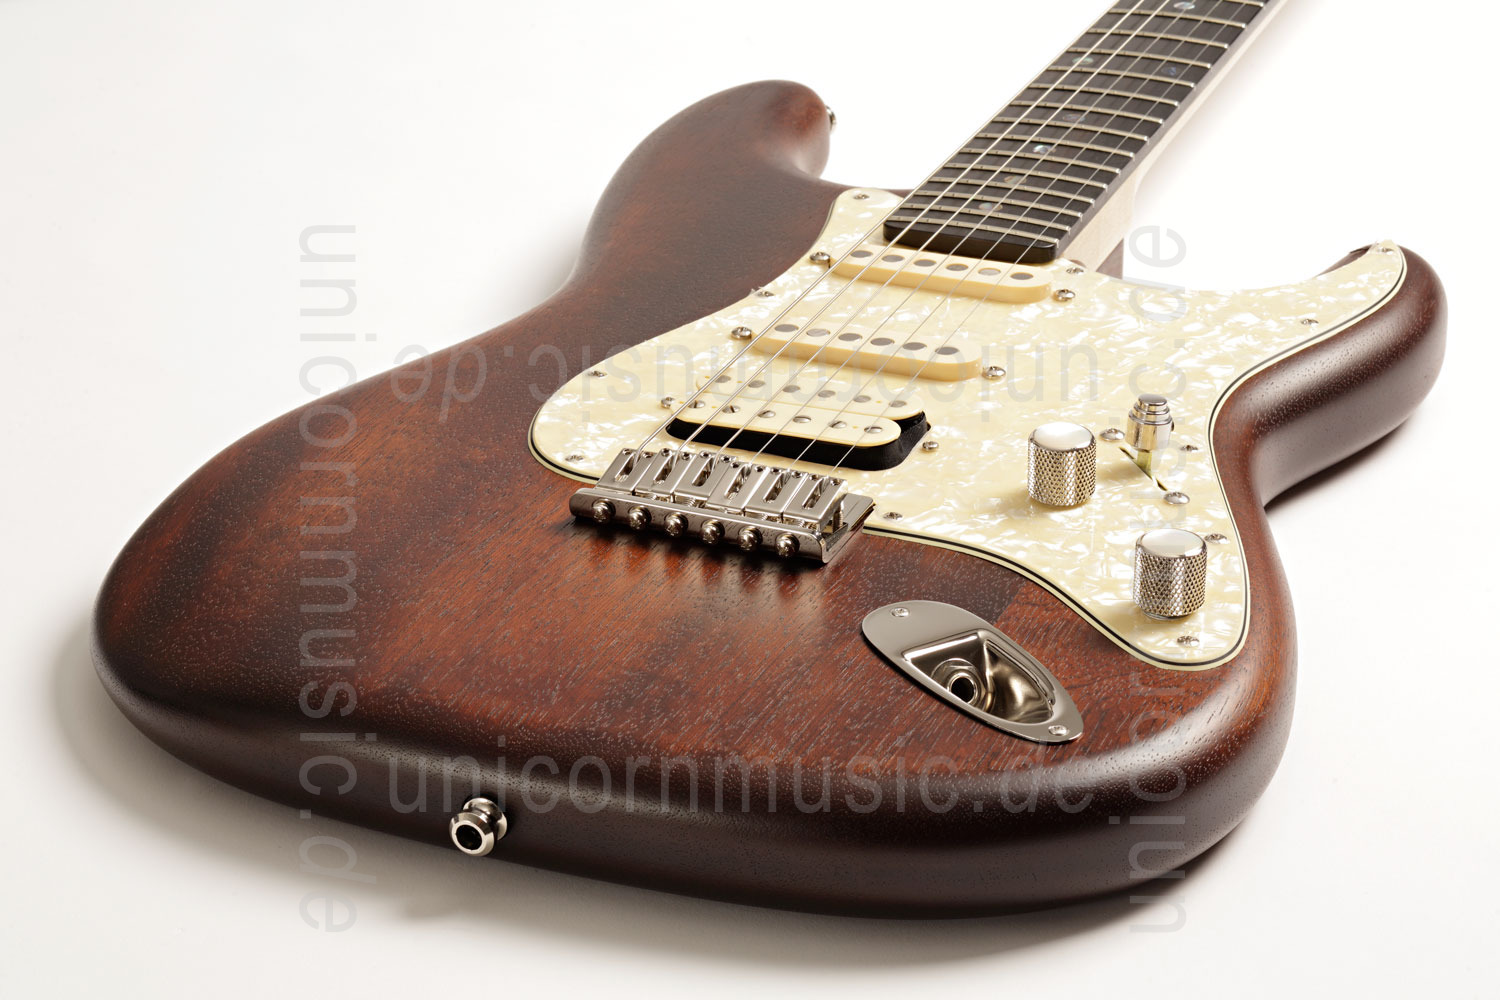 to article description / price Electric Guitar BERSTECHER Deluxe 2018 - Old Whisky / Cream Perloid + hard case - made in Germany